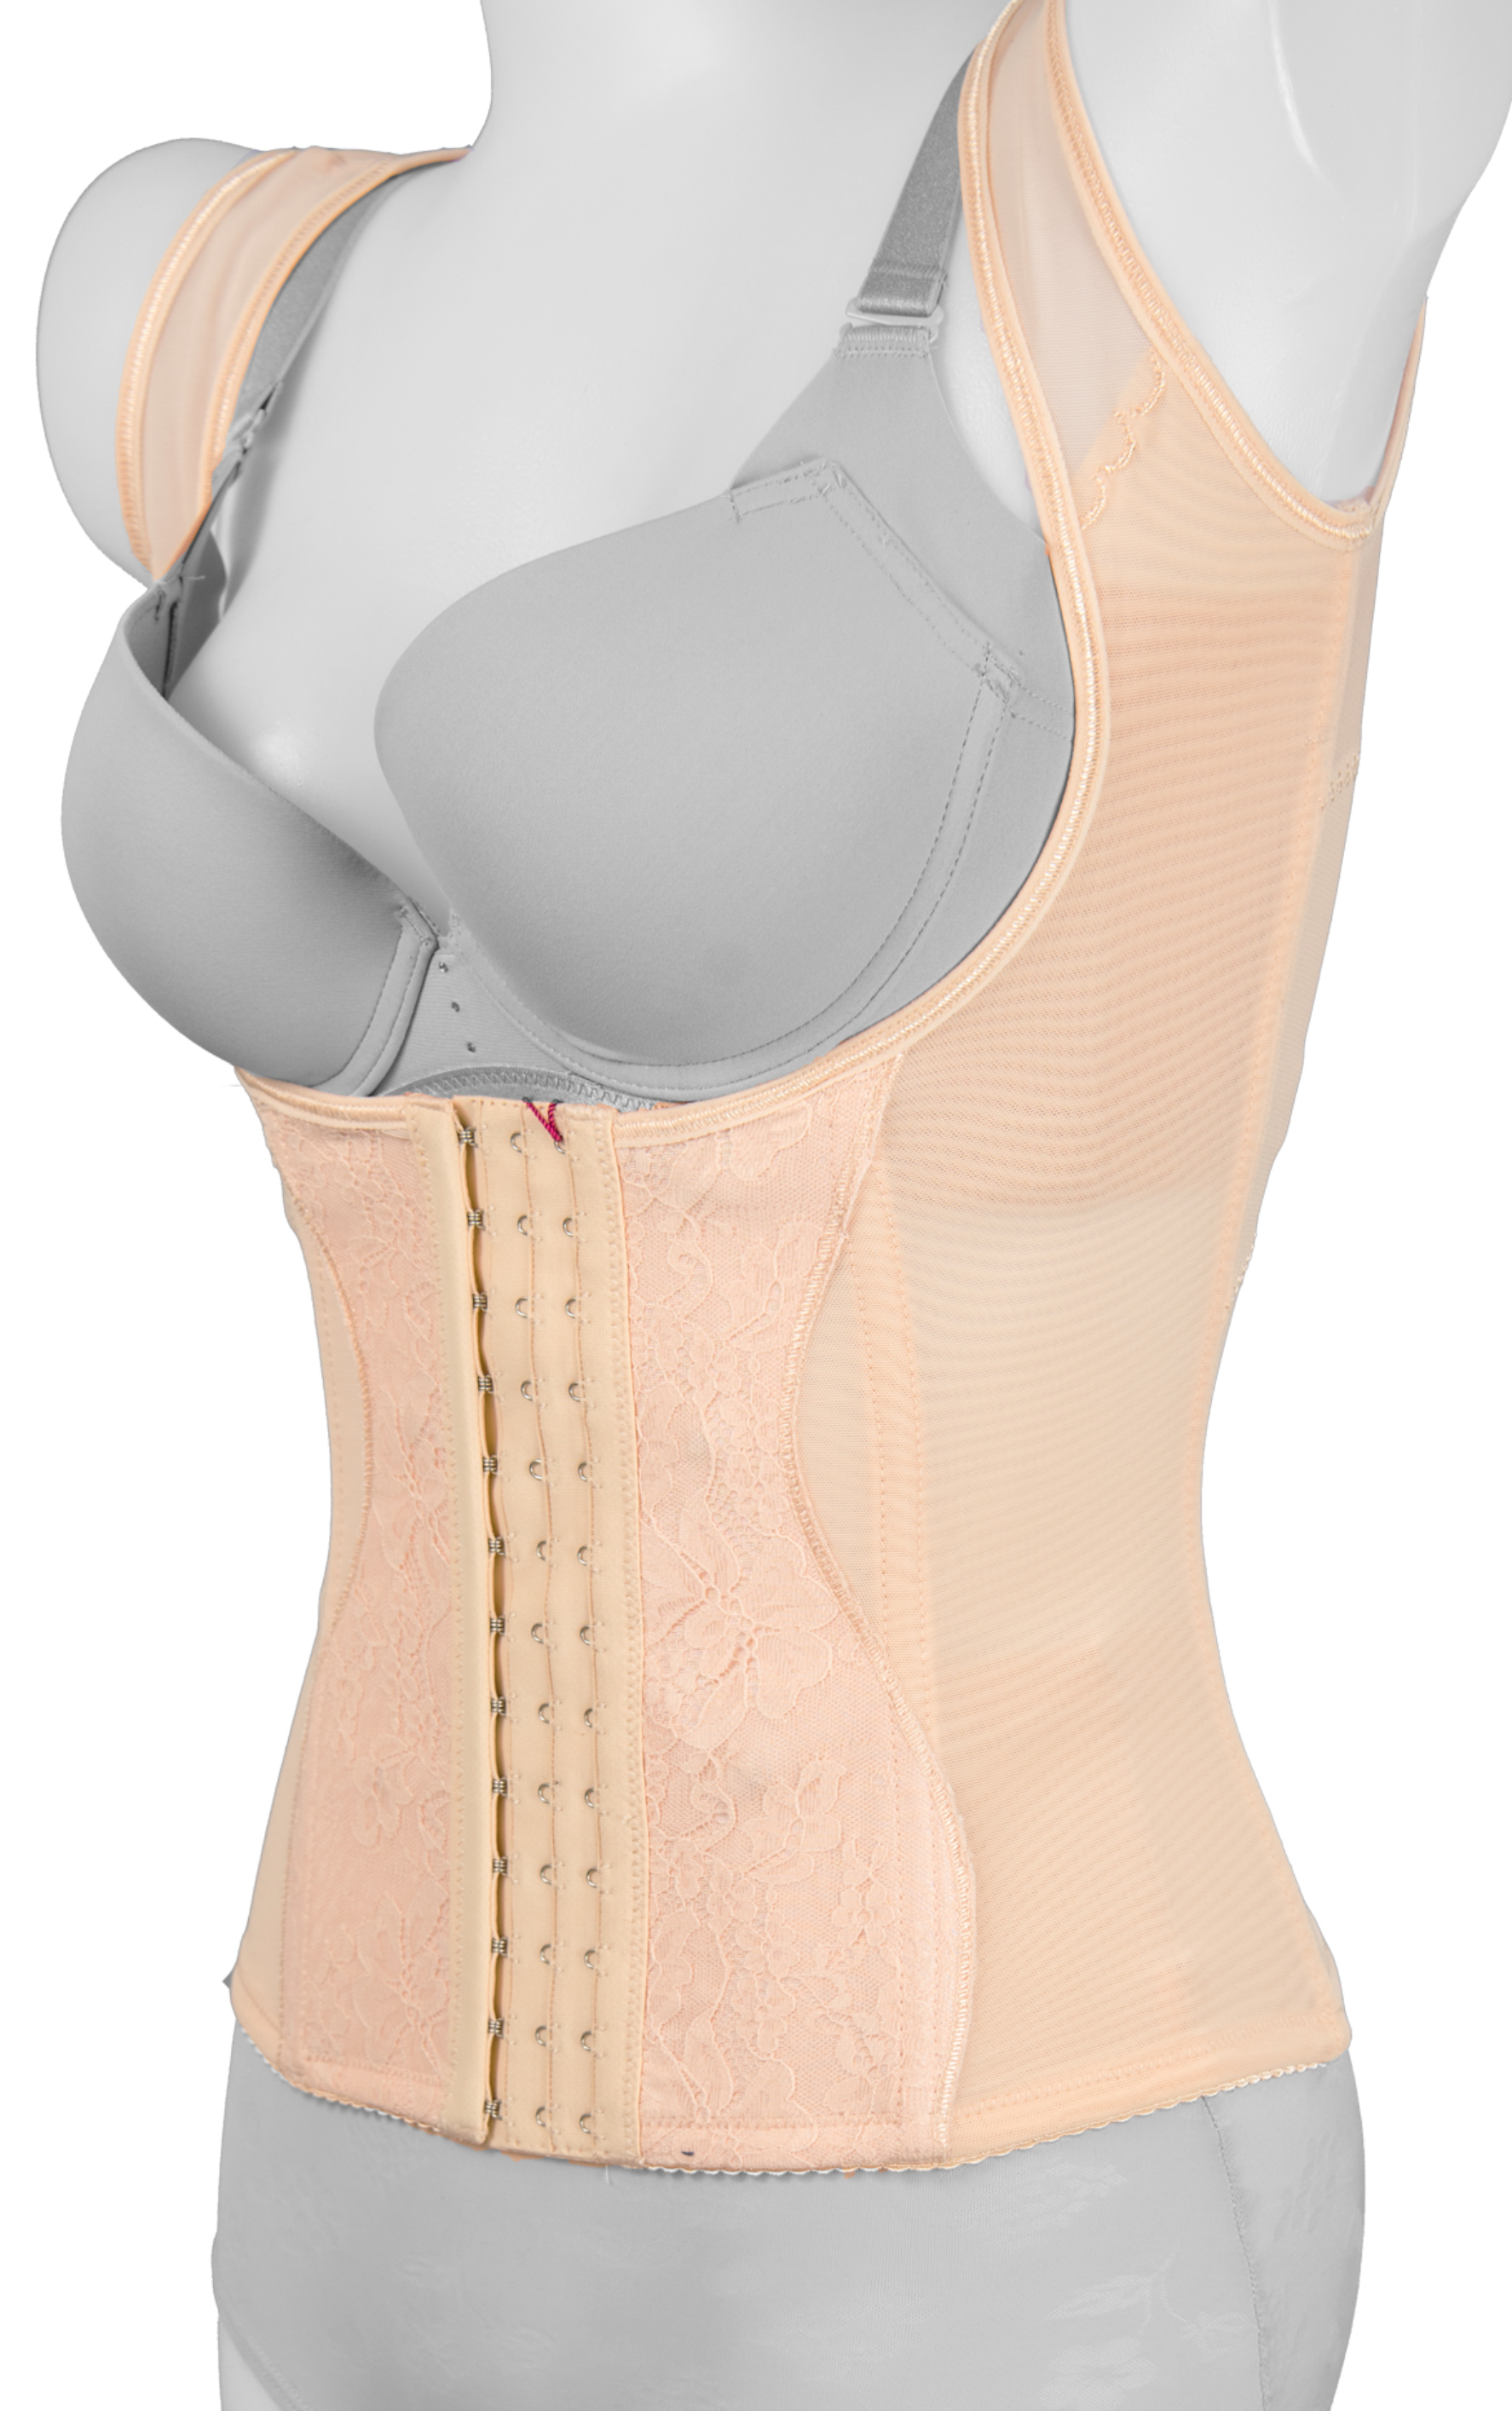 High Compression Waist Trainer Butt Lifter Shorts Tanga Faja Control  Panties Charming Curves Slimming Body Shaper Shape size M Color Beige